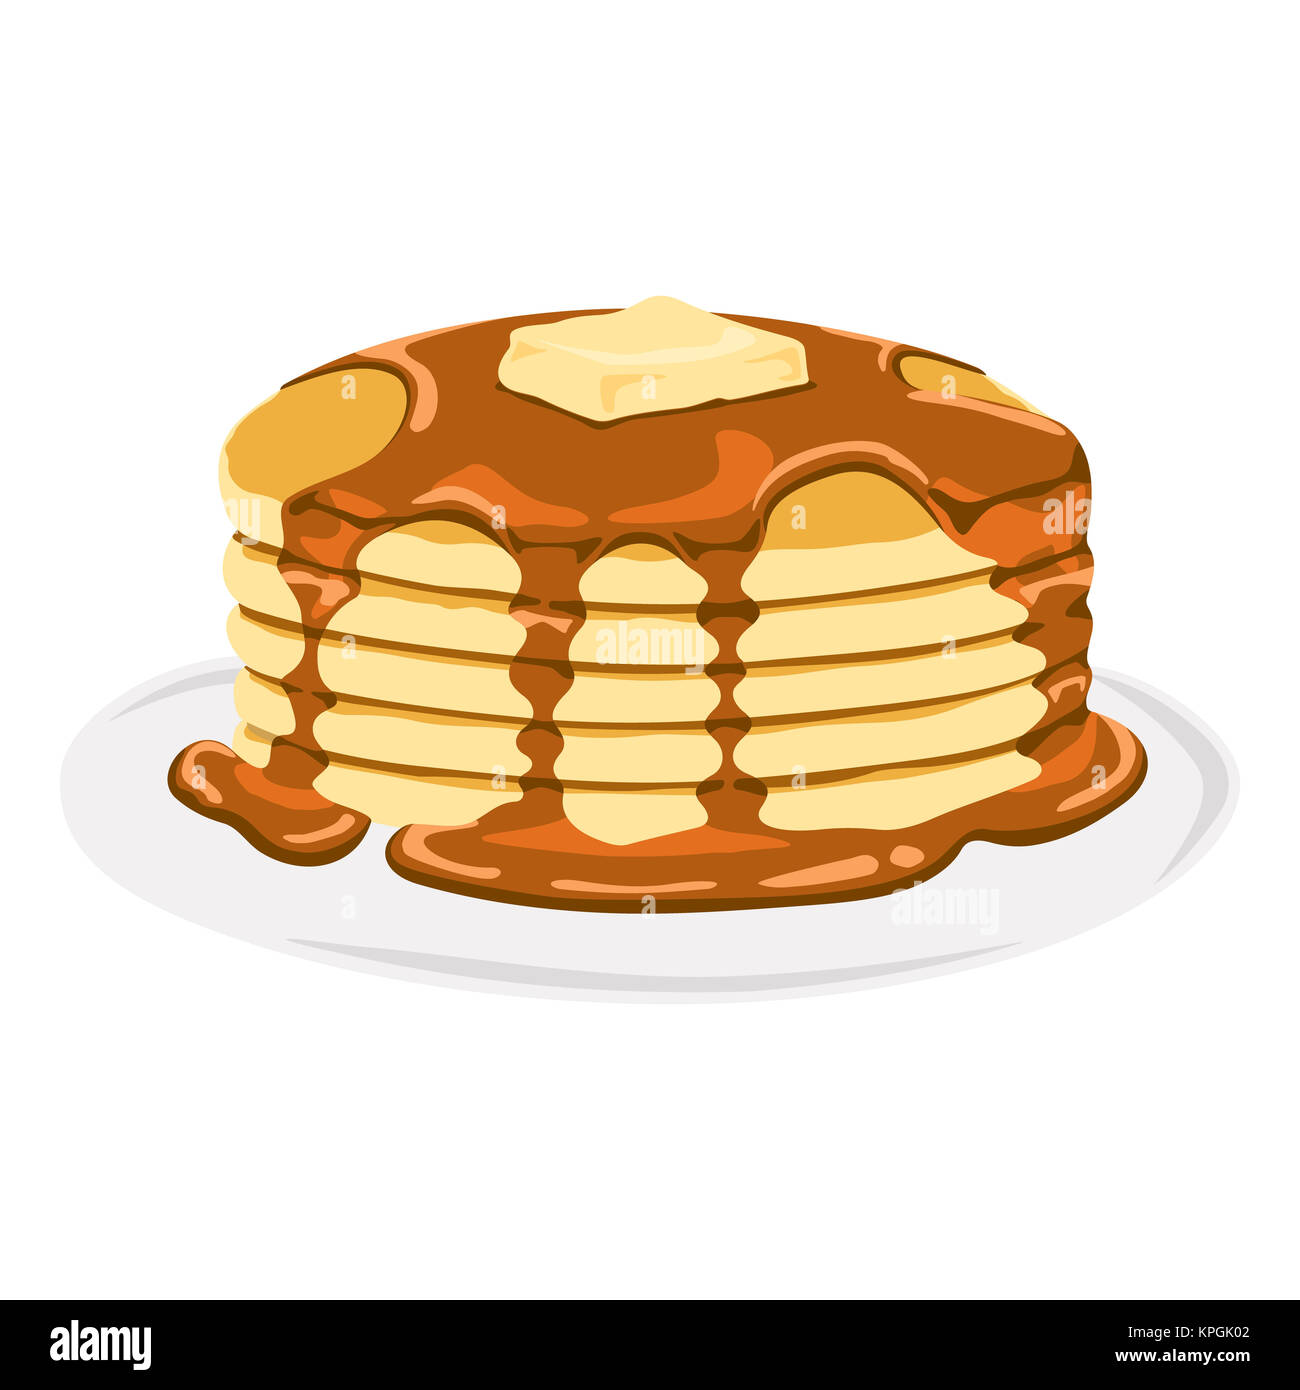 Isolated Vector Pancake with Maple Syrup and Butter on Top Illustration Stock Photo